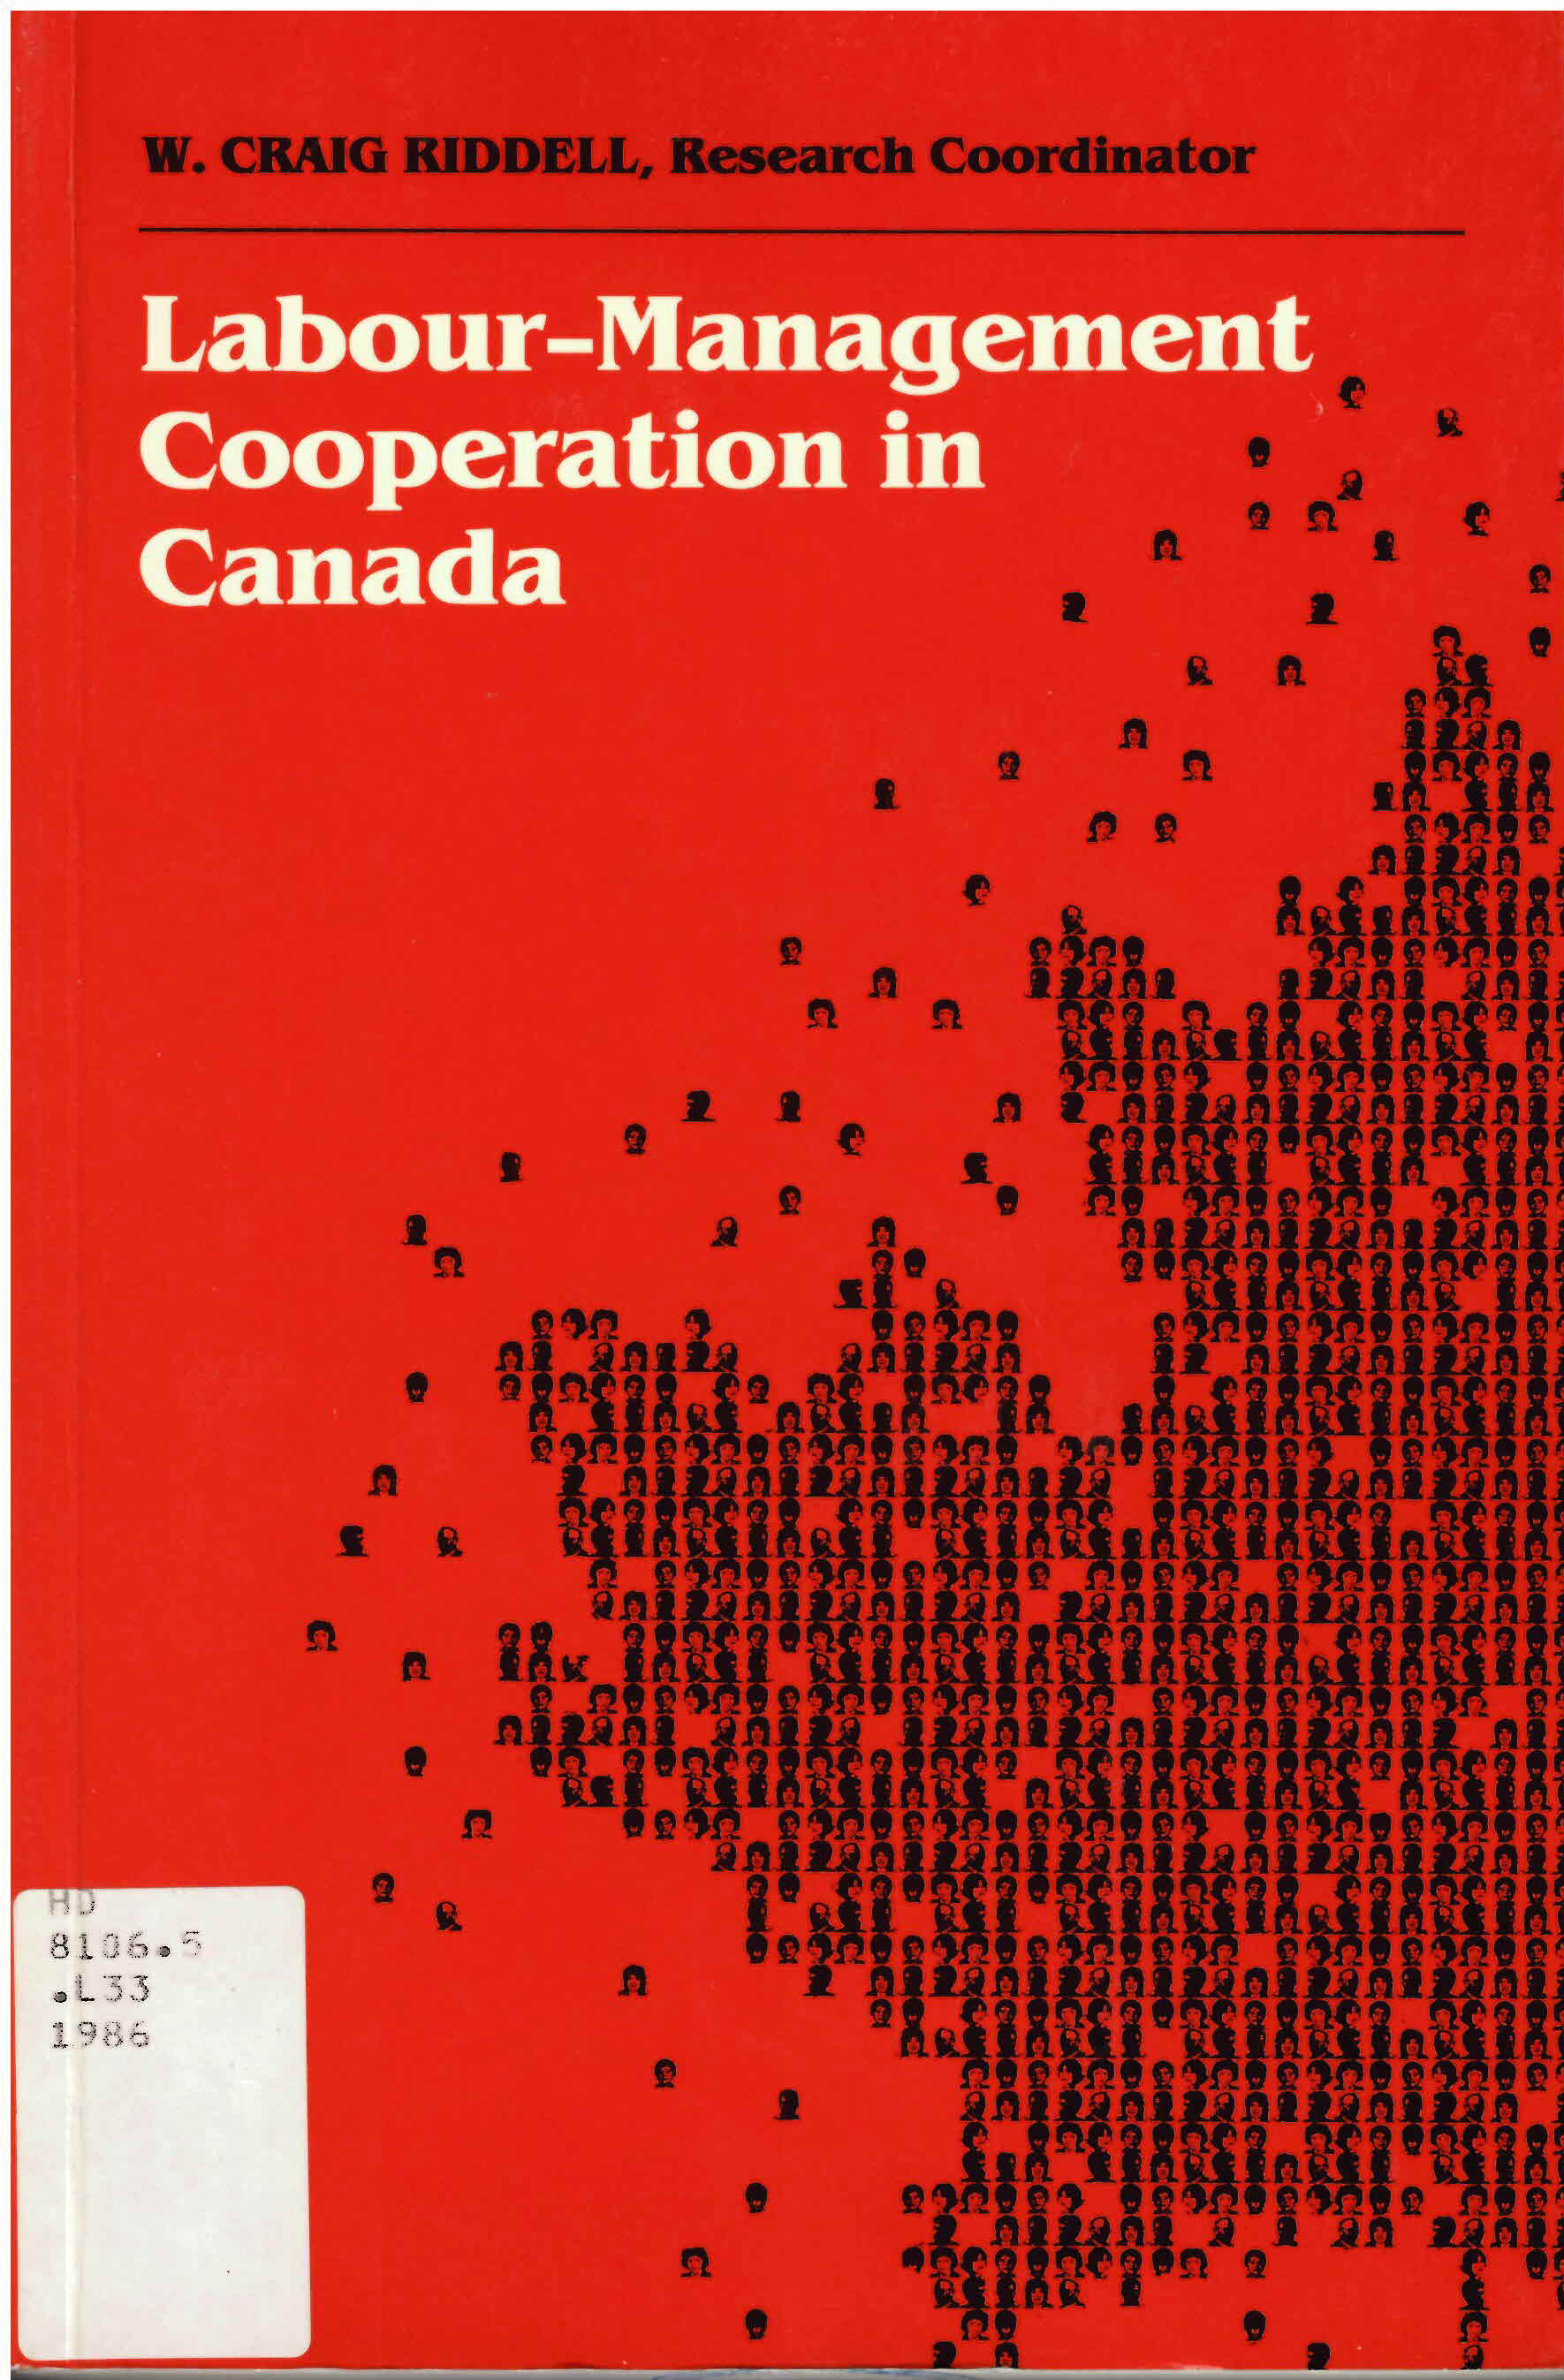 Labour-management cooperation in Canada